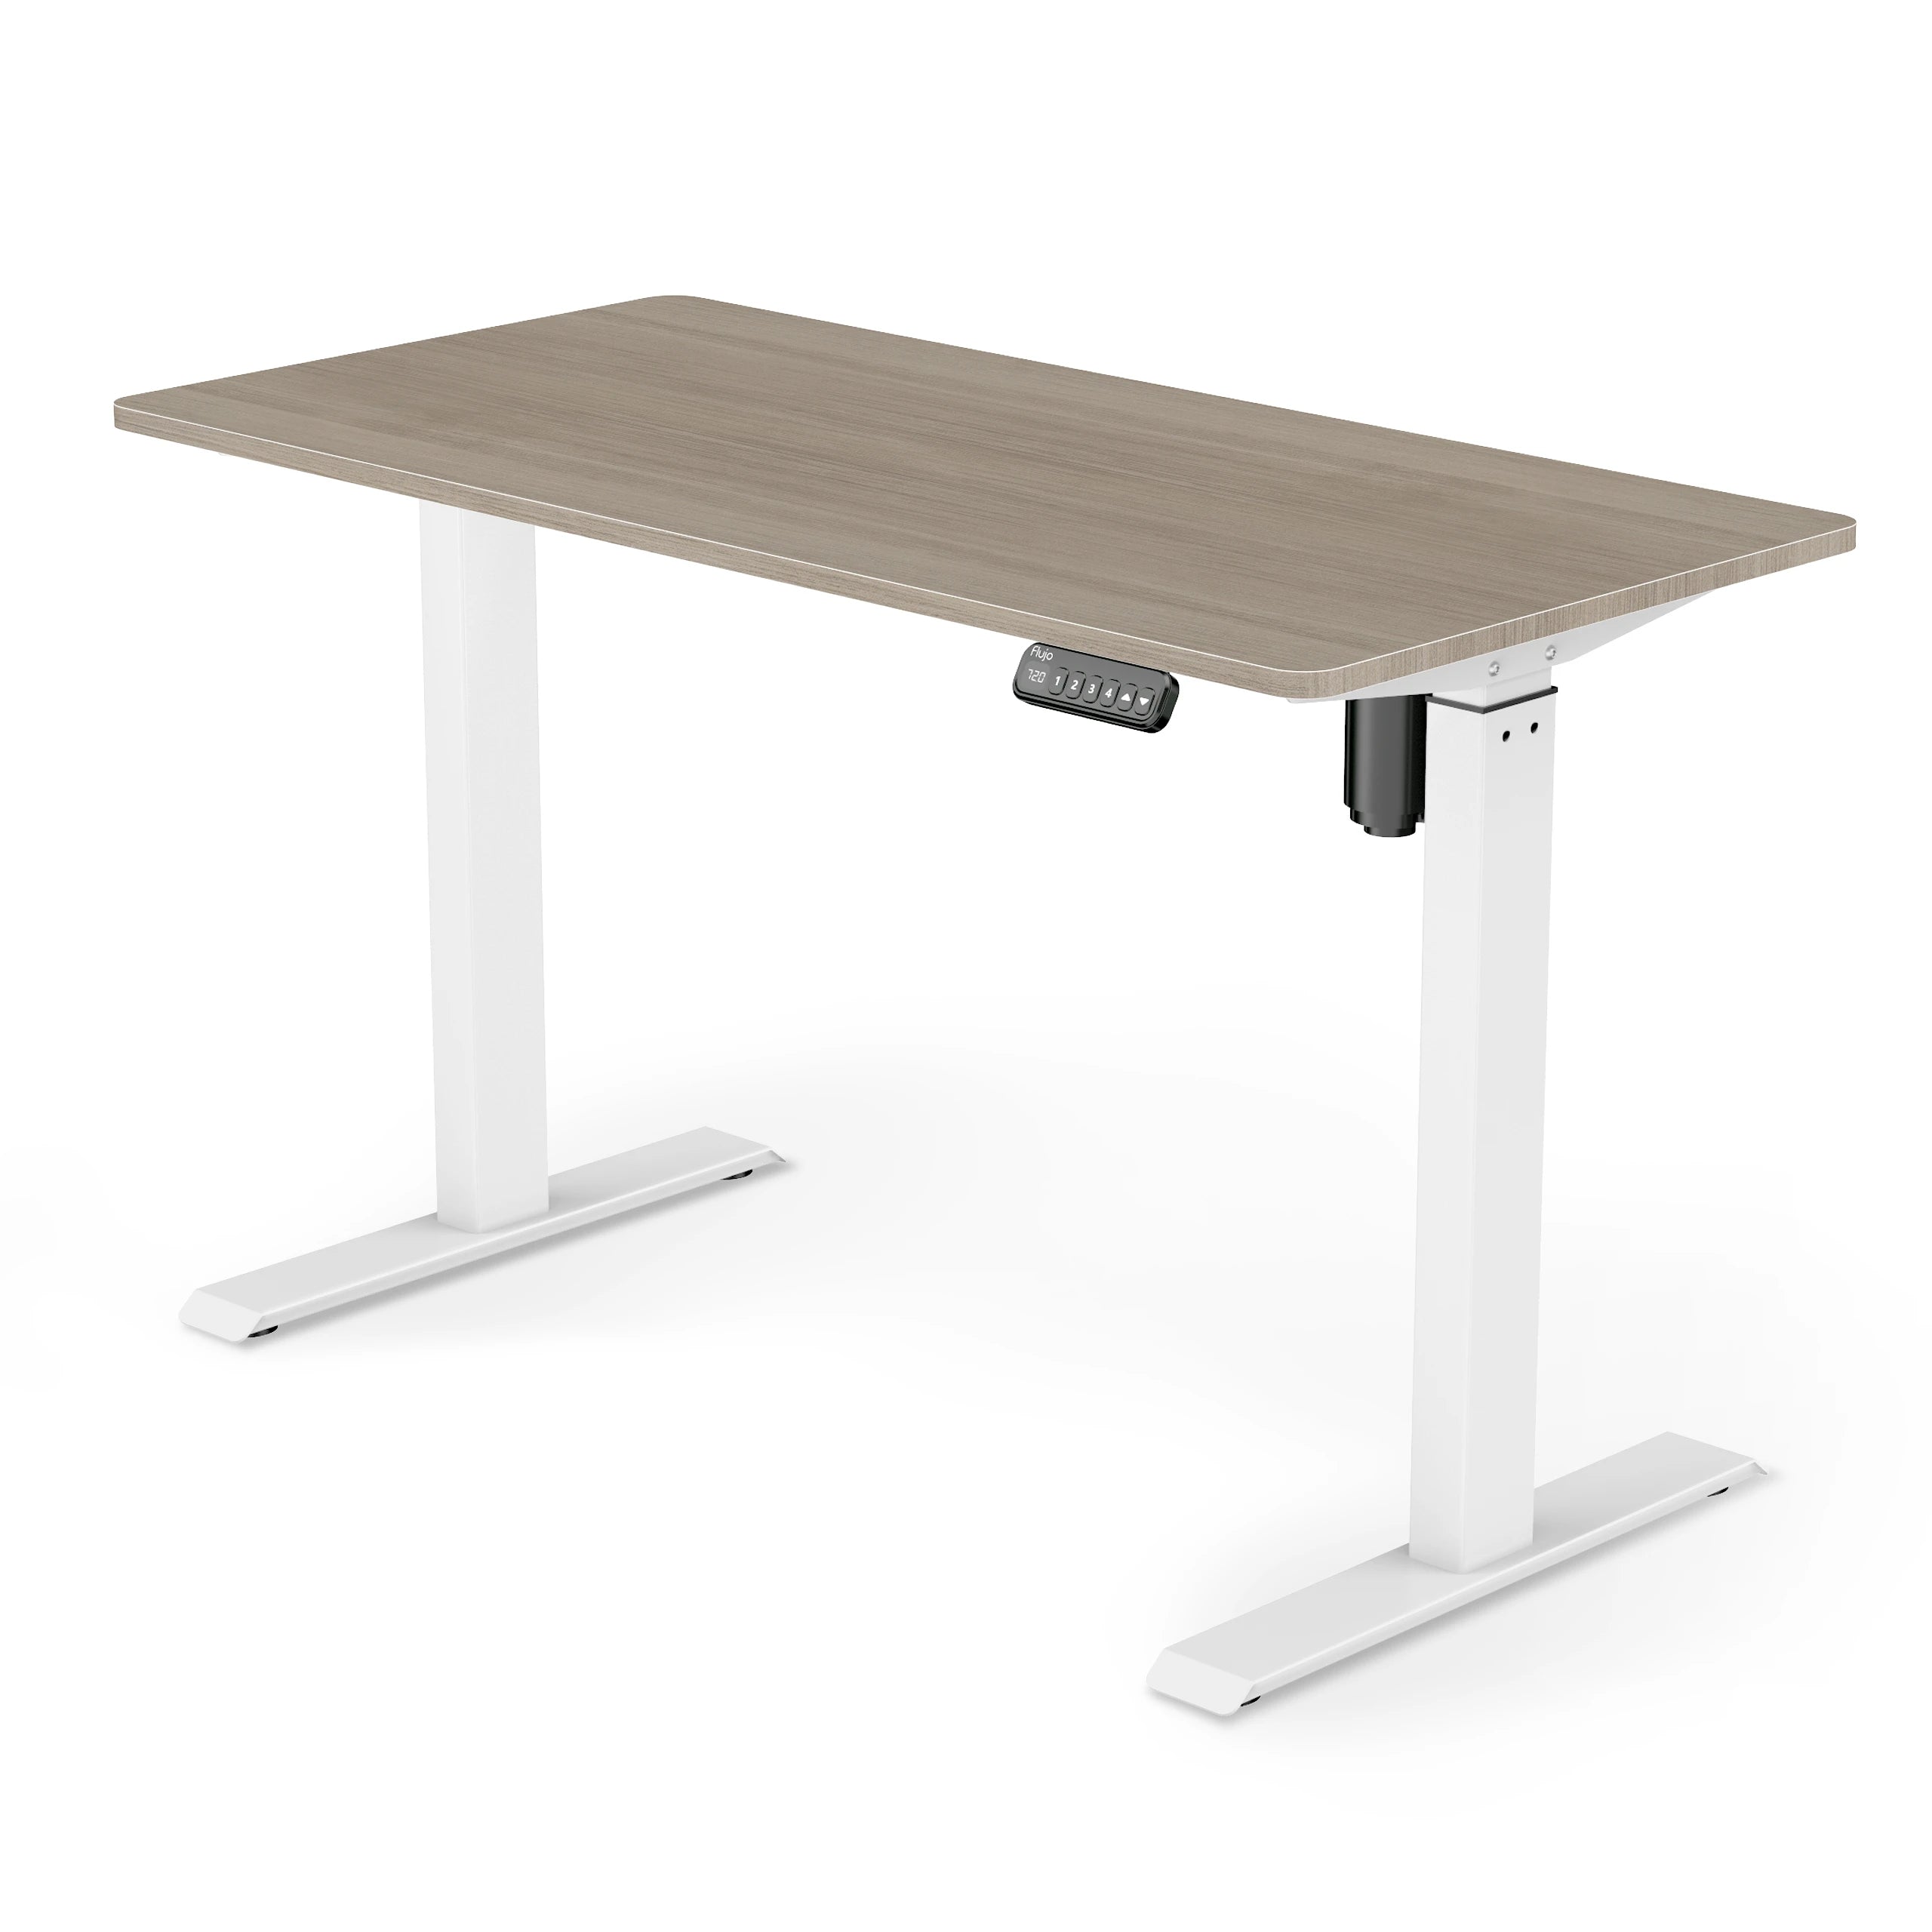 SmarTrax Ergonomic Standing Desk featuring a Beirut wood finish and white frame, complete with programmable height settings for a comfortable standing work experience.